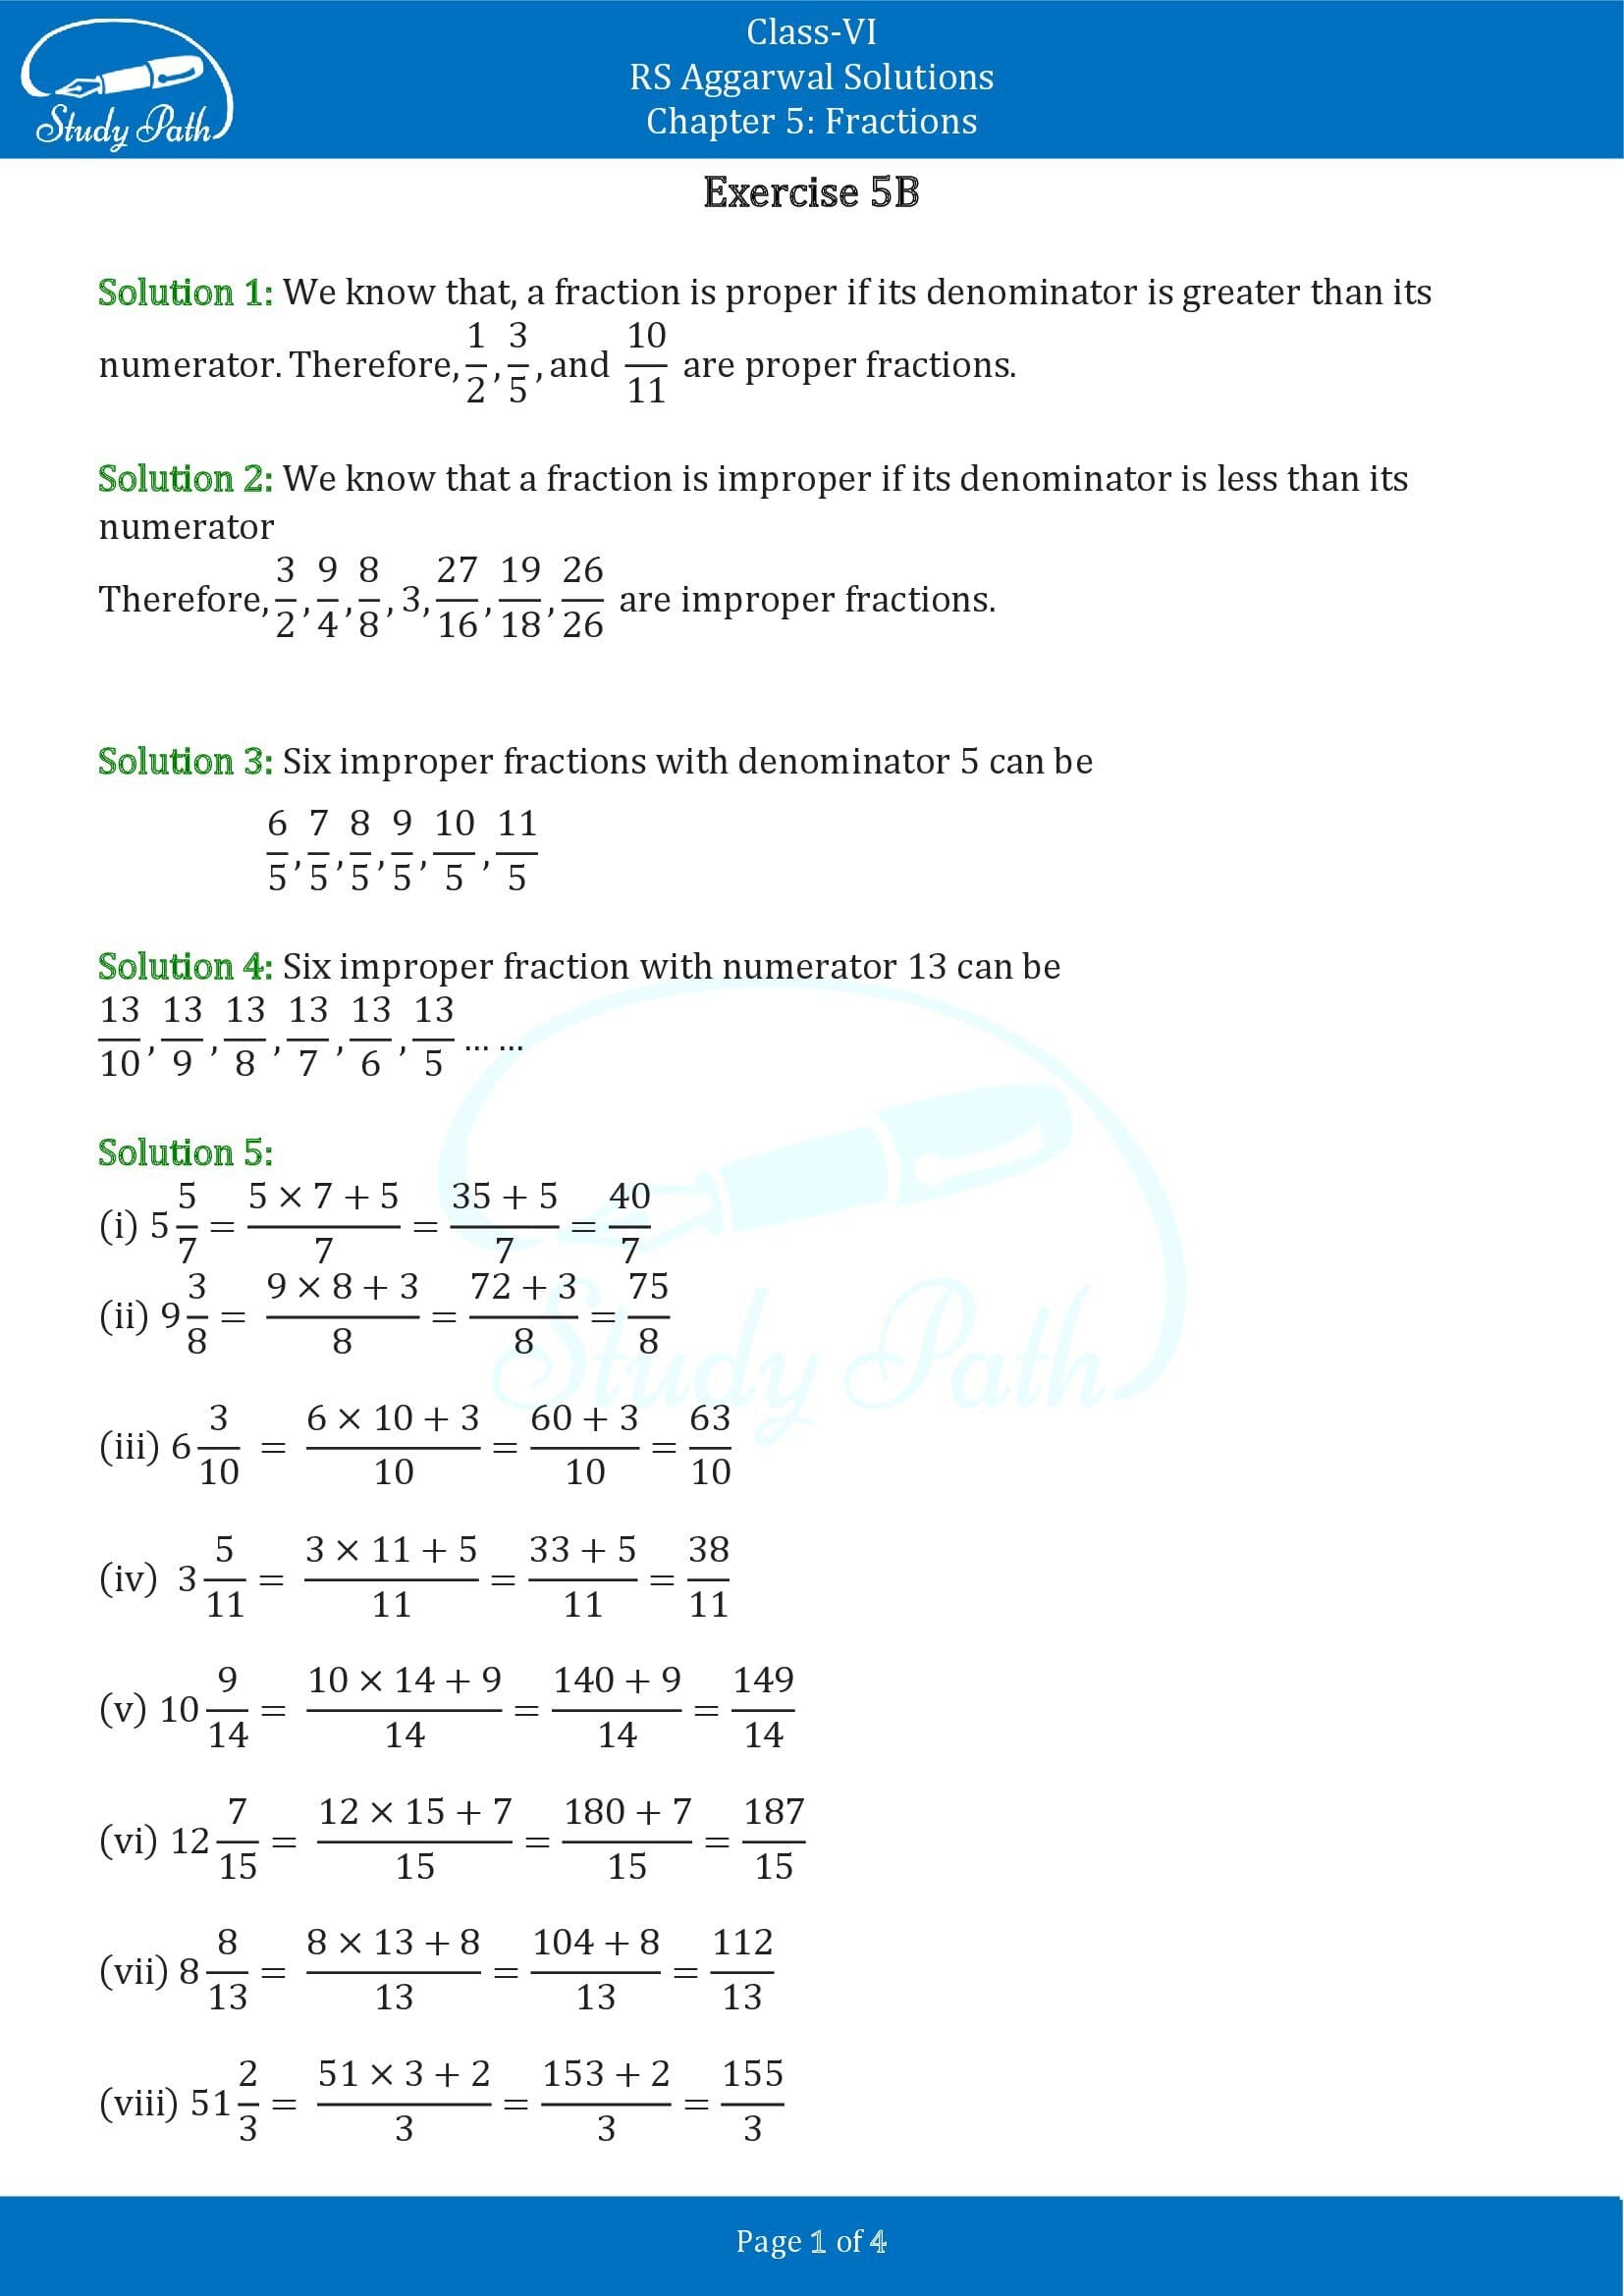 RS Aggarwal Solutions Class 6 Chapter 5 Fractions Exercise 5B 00001